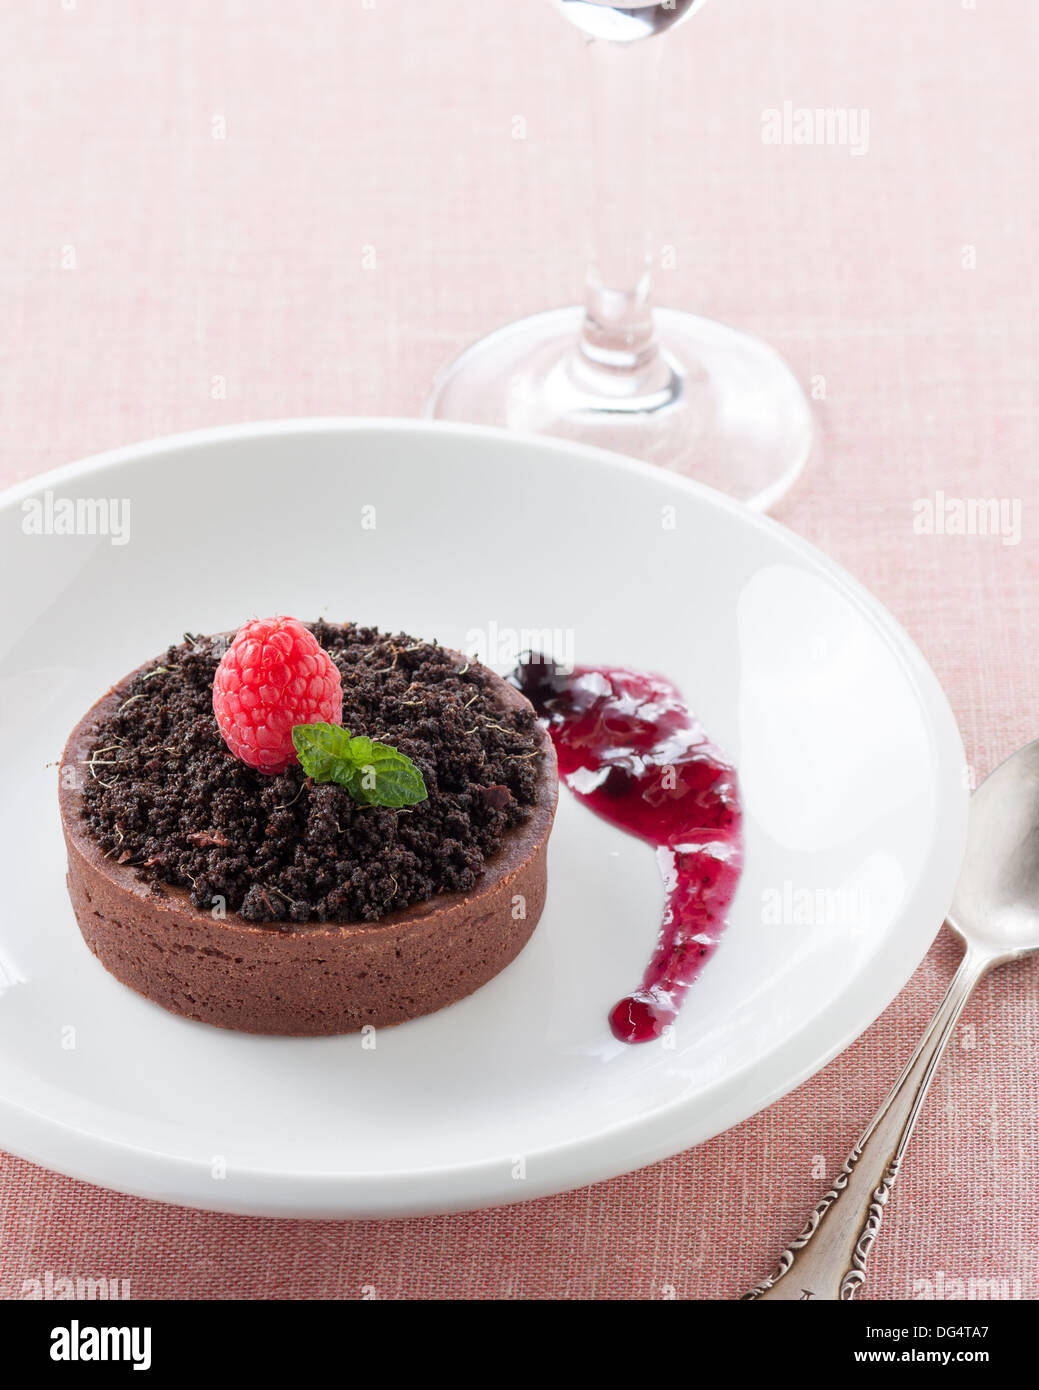 Portion of chocolate and strawberry cake on the table Stock Photo